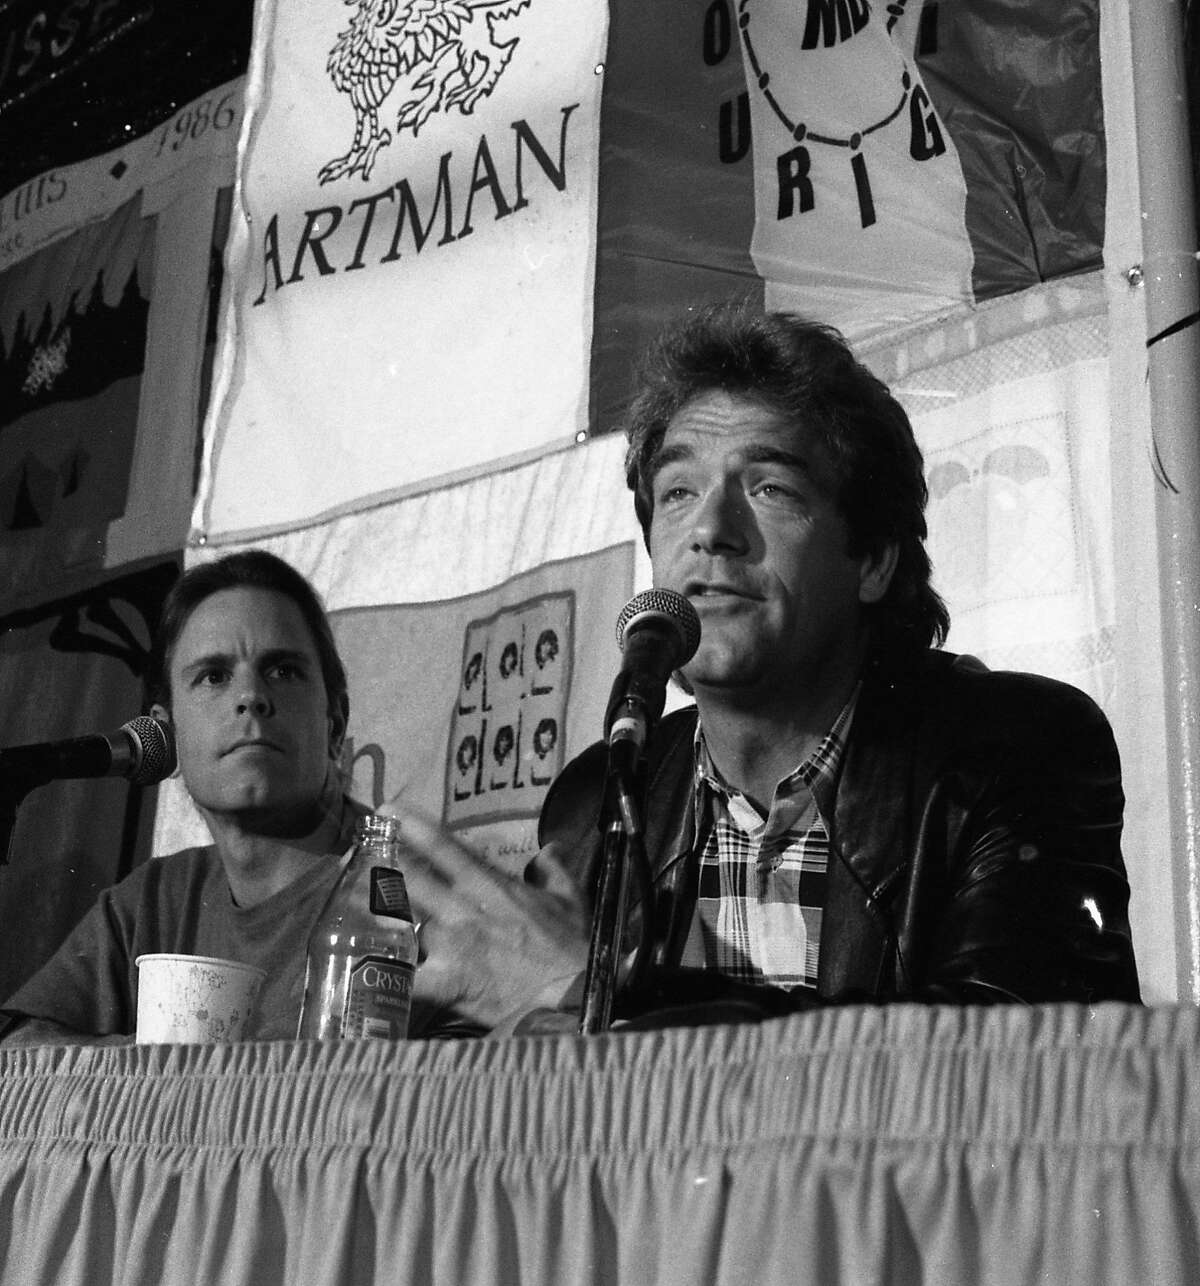 Bill Graham and San Francisco musicians would announce plans to organize a series of concert to benefit AIDS, March 22, 1989 Seen here are member of the Grateful Dead Bob Weir (l) and Huey Lewis (r)